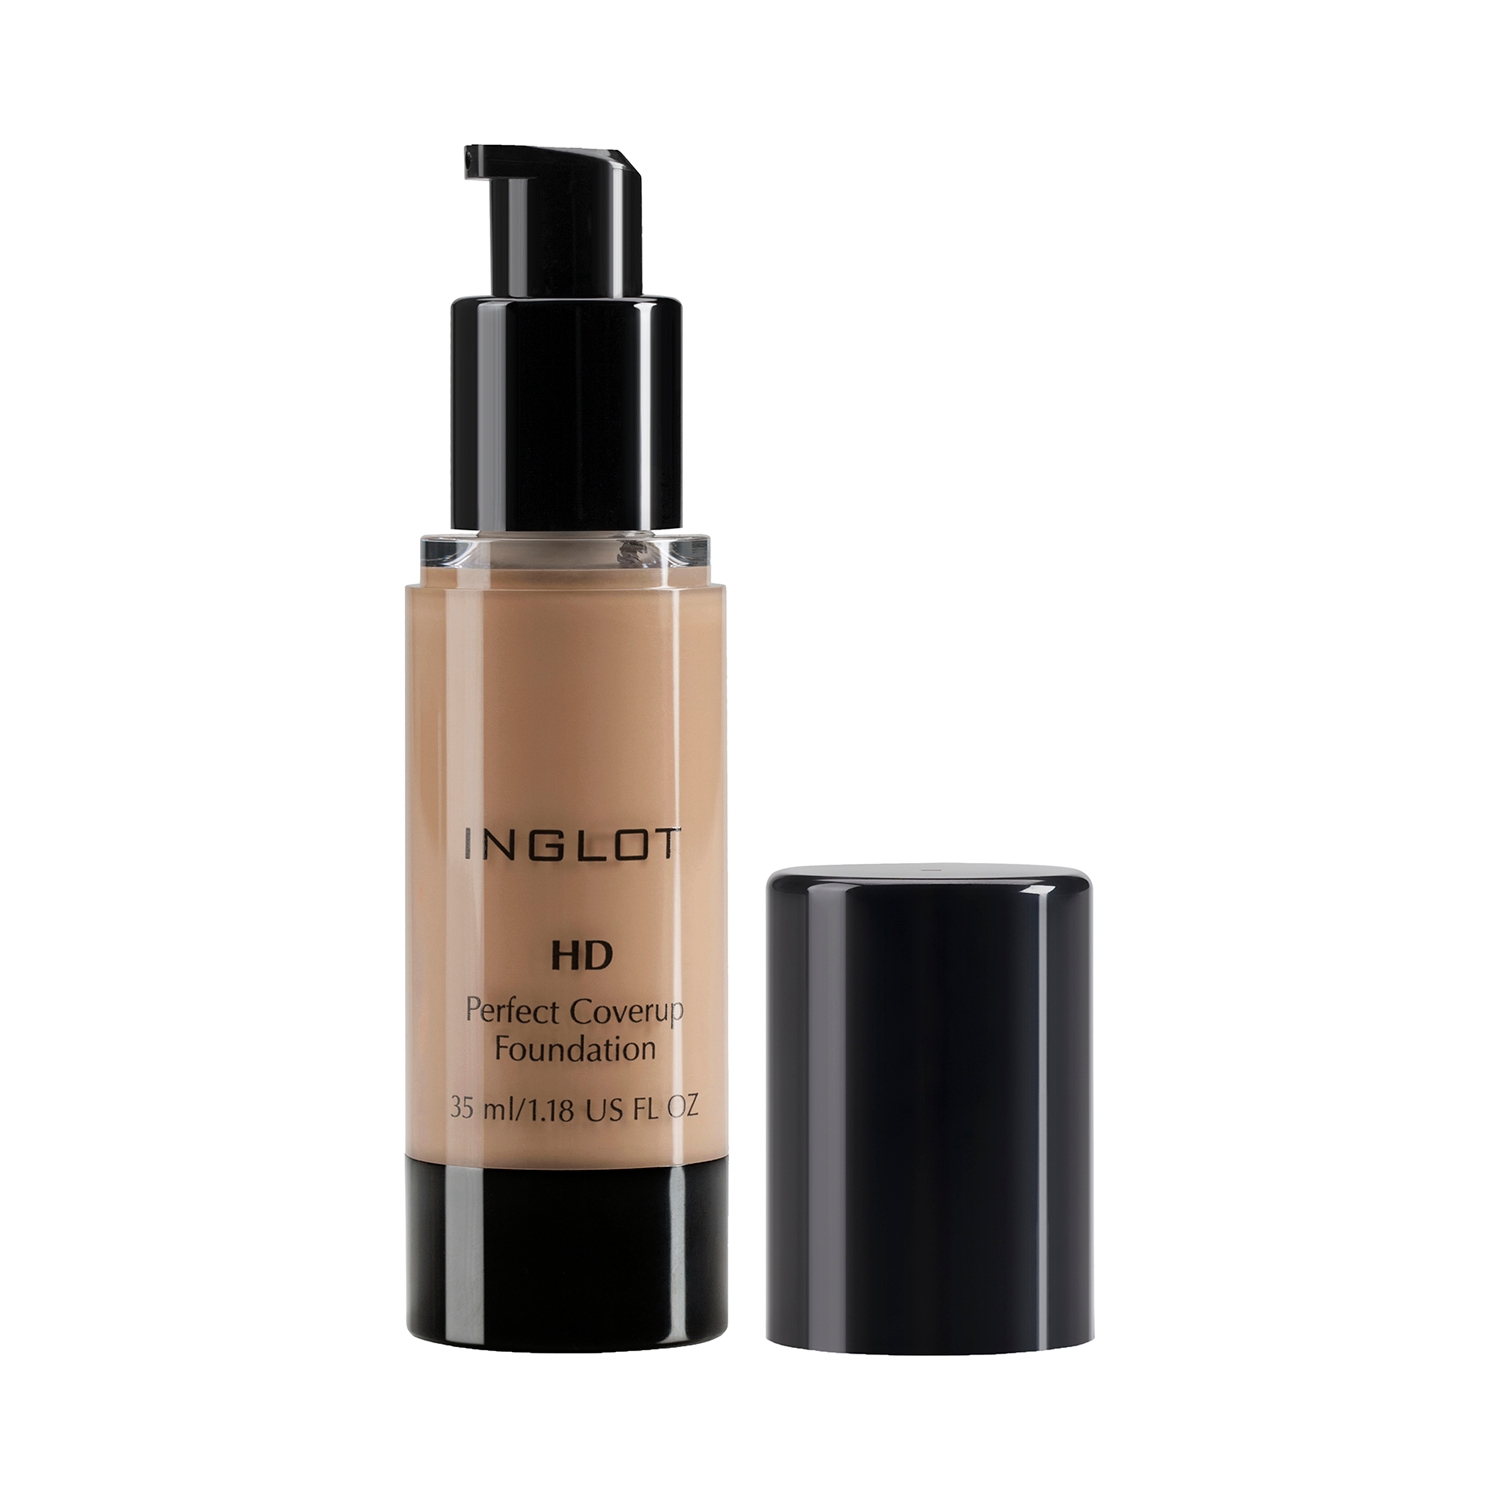 INGLOT | INGLOT HD Perfect Coverup Foundation - LW81 (30ml)